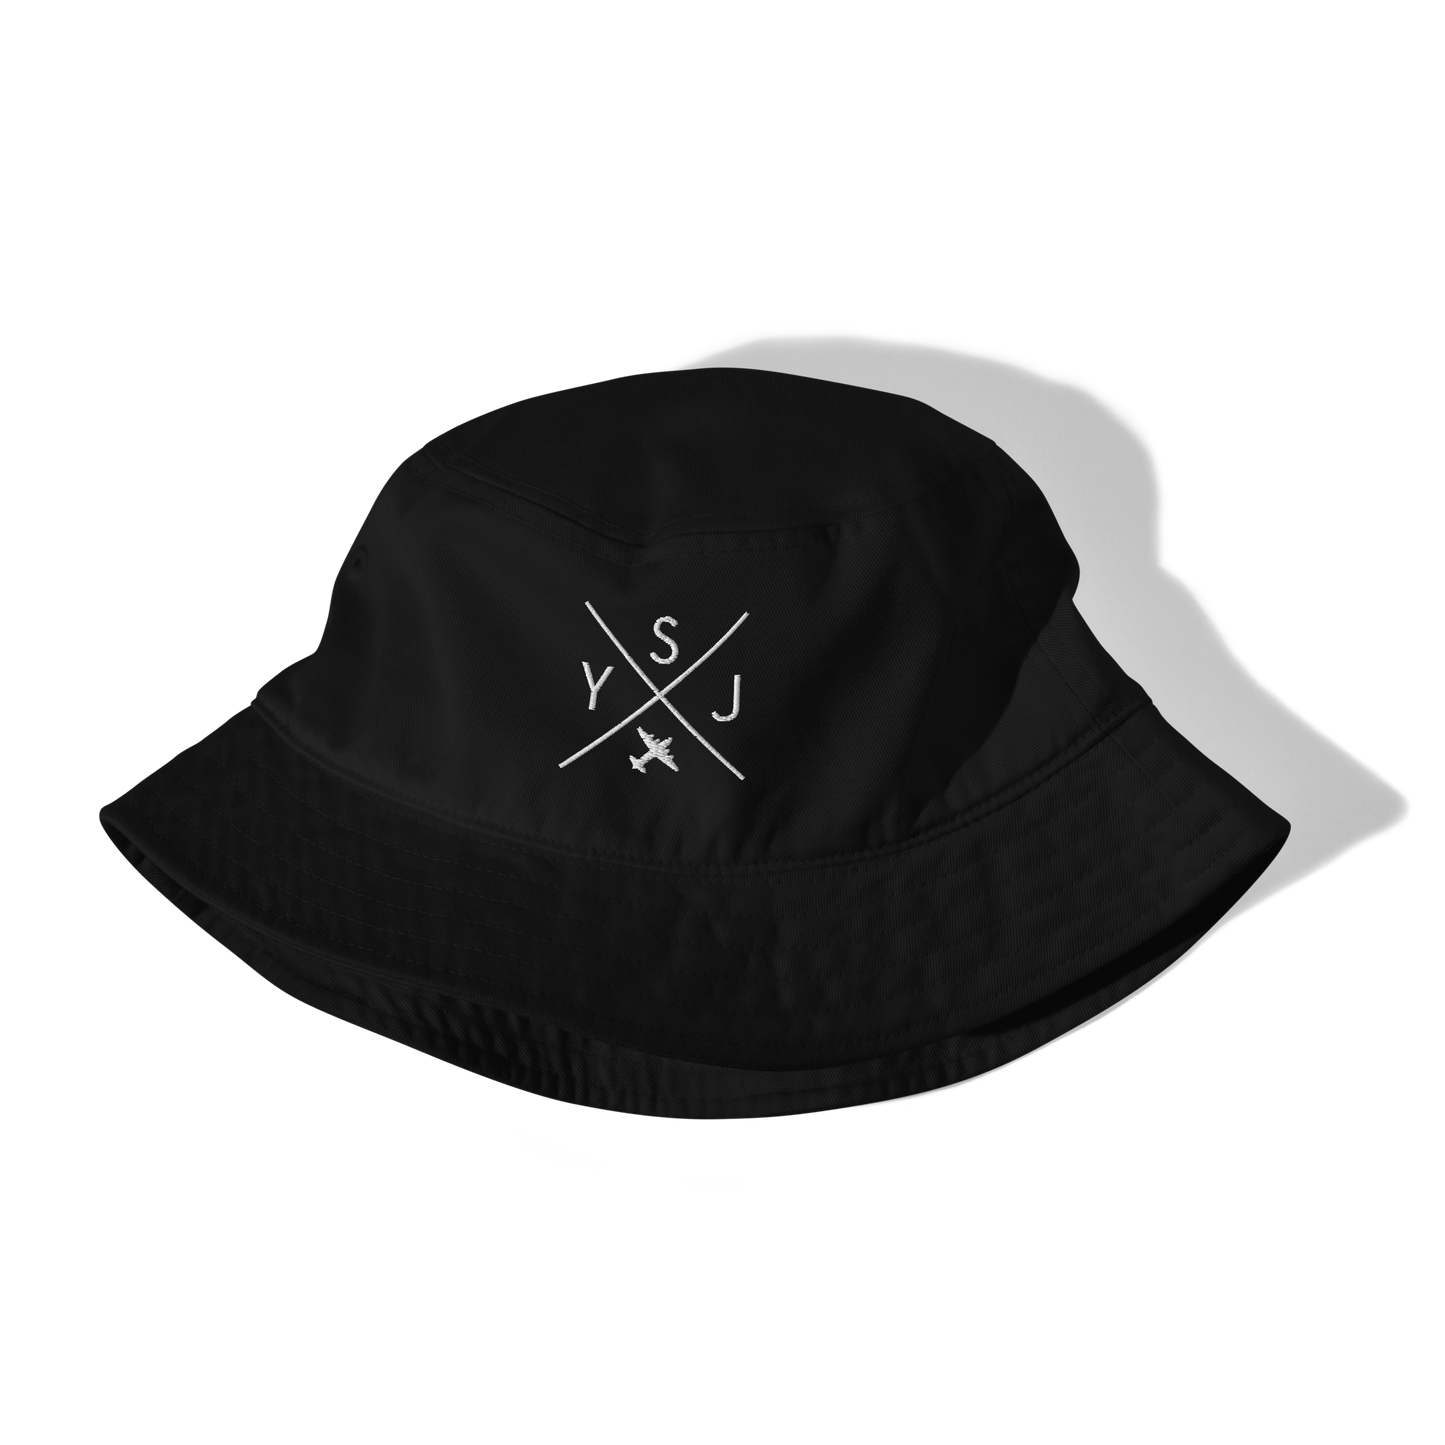 YHM Designs - YSJ Saint John Organic Cotton Bucket Hat - Crossed-X Design with Airport Code and Vintage Propliner - White Embroidery - Image 02